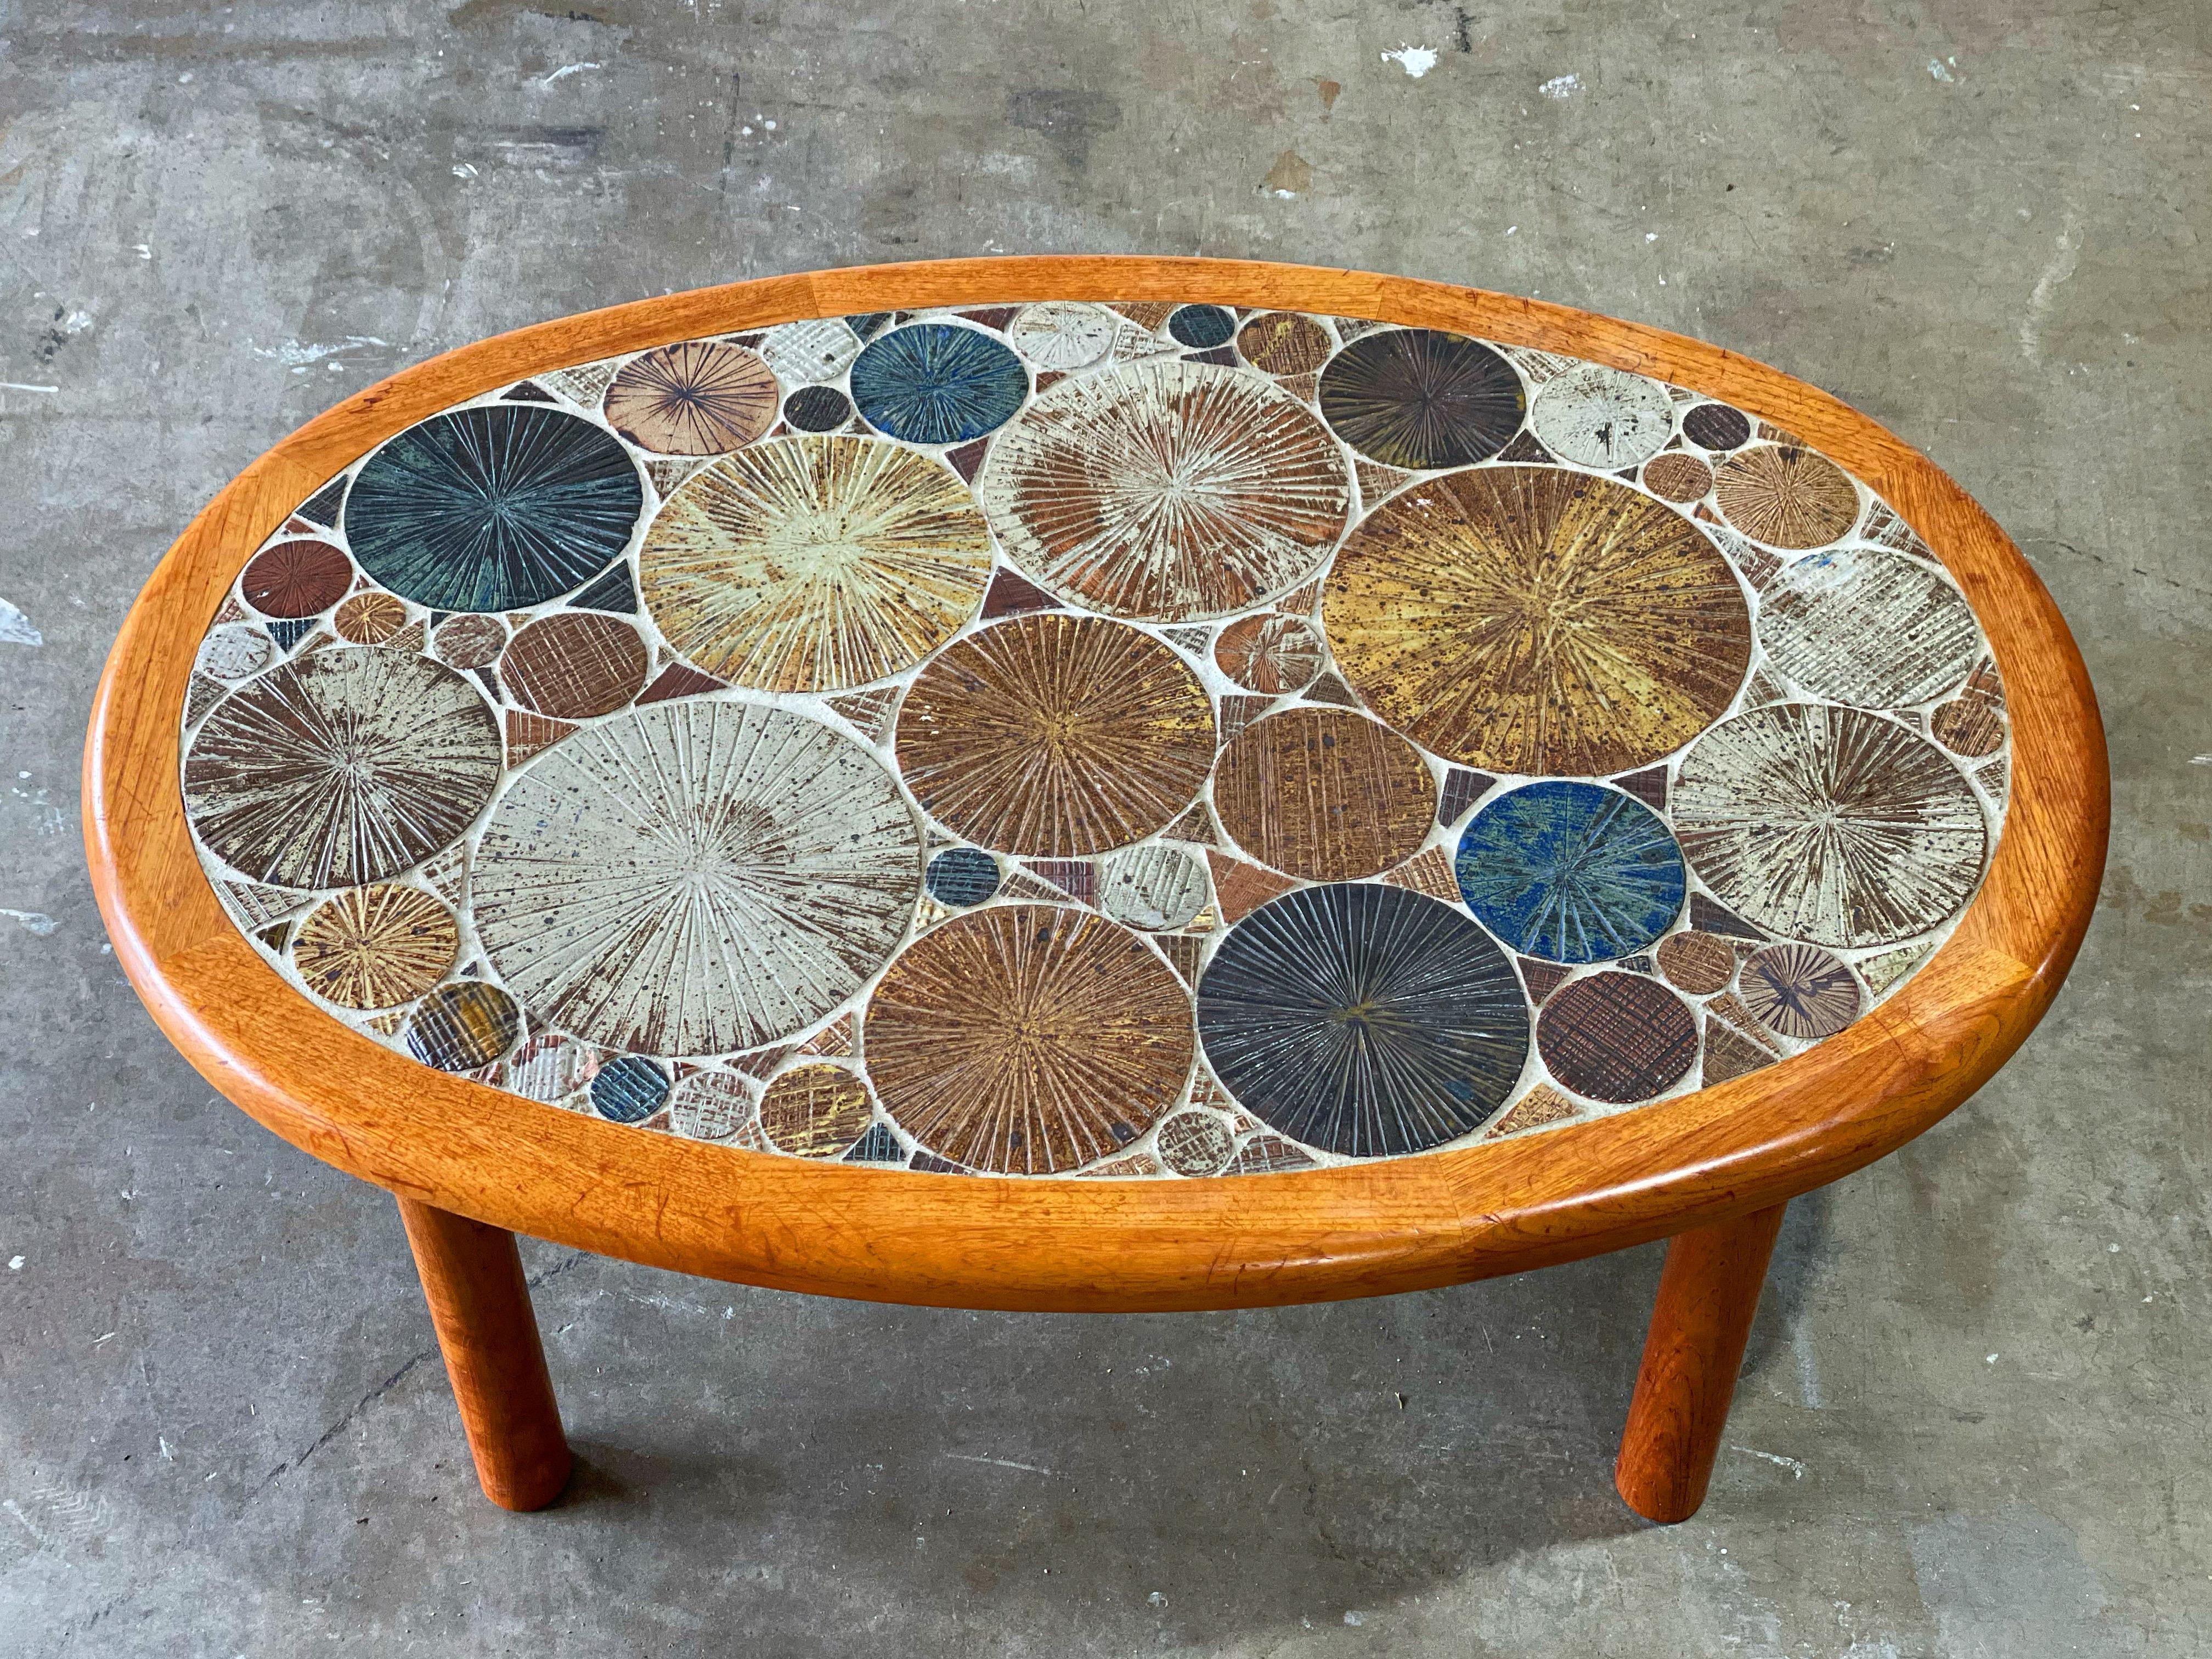 Danish modern coffee cocktail table by Tue Poulsen for Haslev Møbelsnedkeri A/S, Denmark. Oval form top with Solid turned teak legs. Top is inset with incised, hand painted bright glazed ceramic tiles in shades of blue, brown, maroon, mustard,